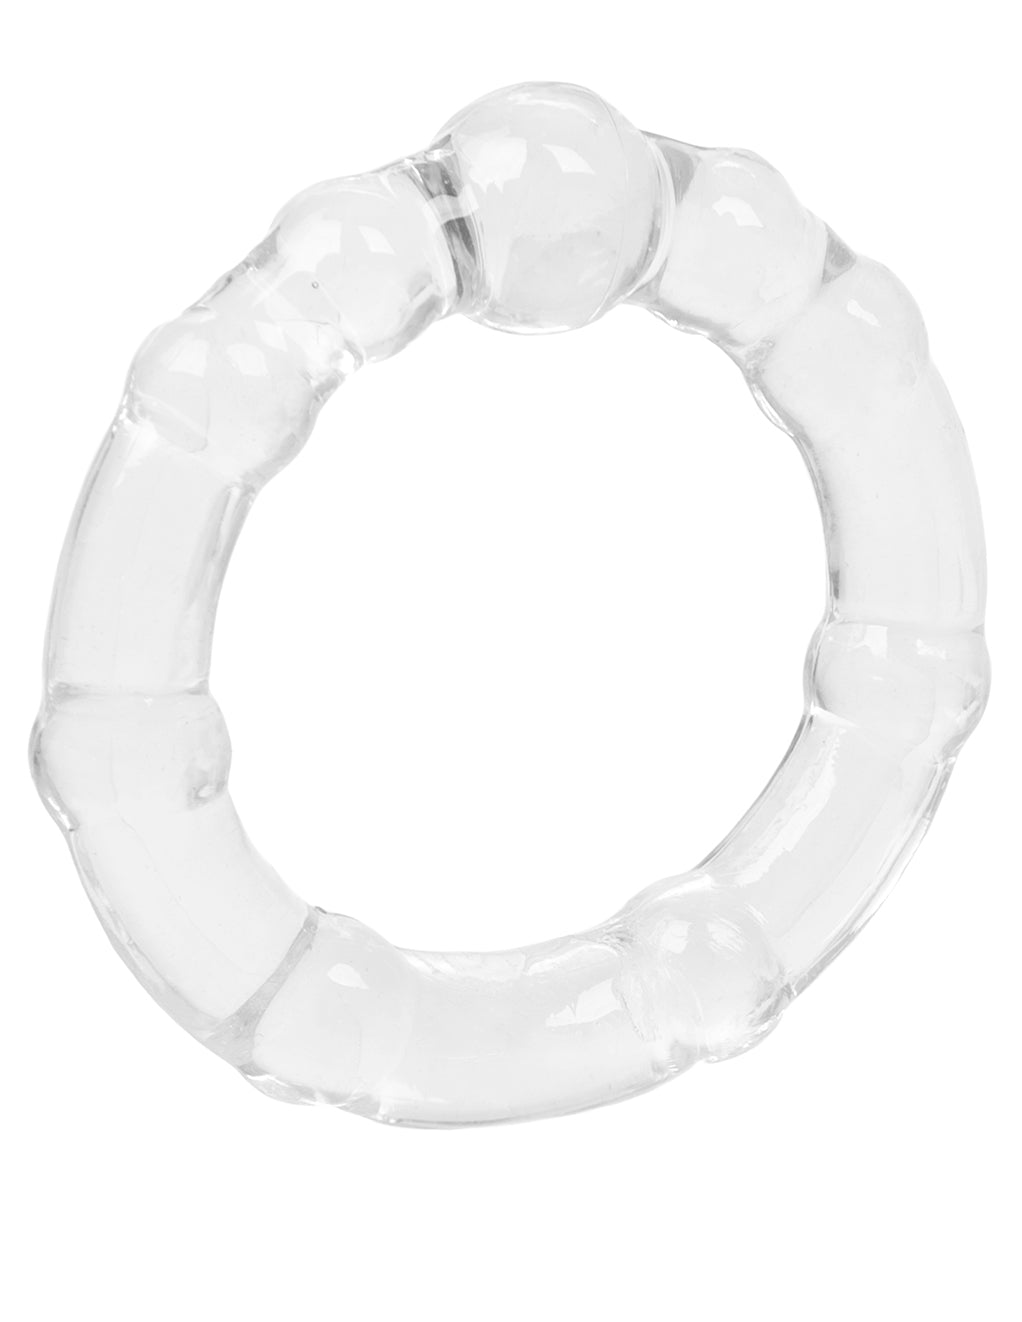 California Exotics 3 Piece Silicone Island Rings- Clear- Side- Back